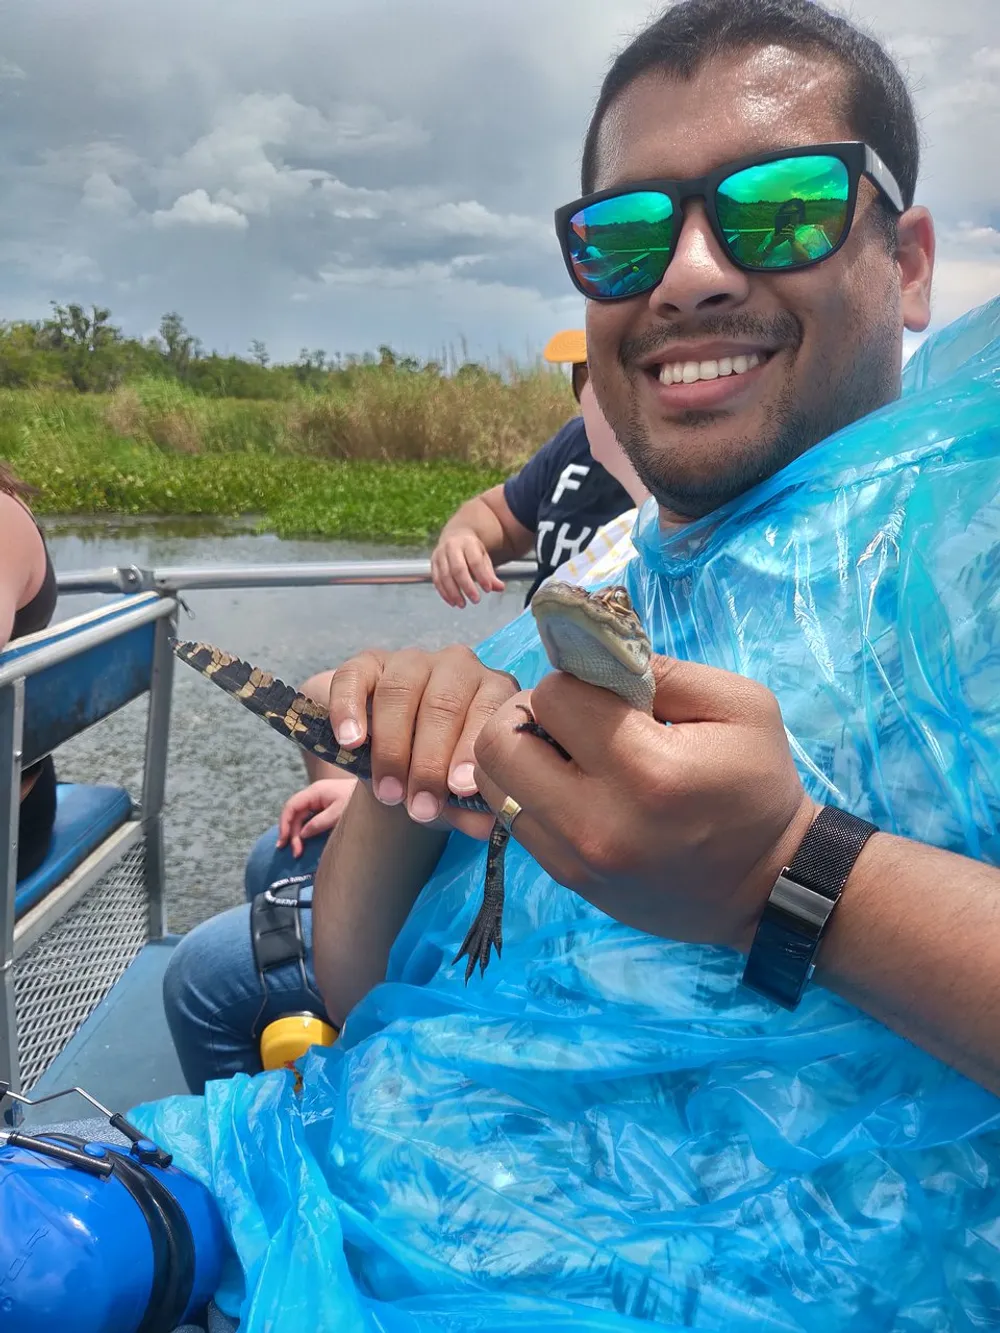 A person wearing a blue poncho and sunglasses is smiling while holding a baby alligator on a boat